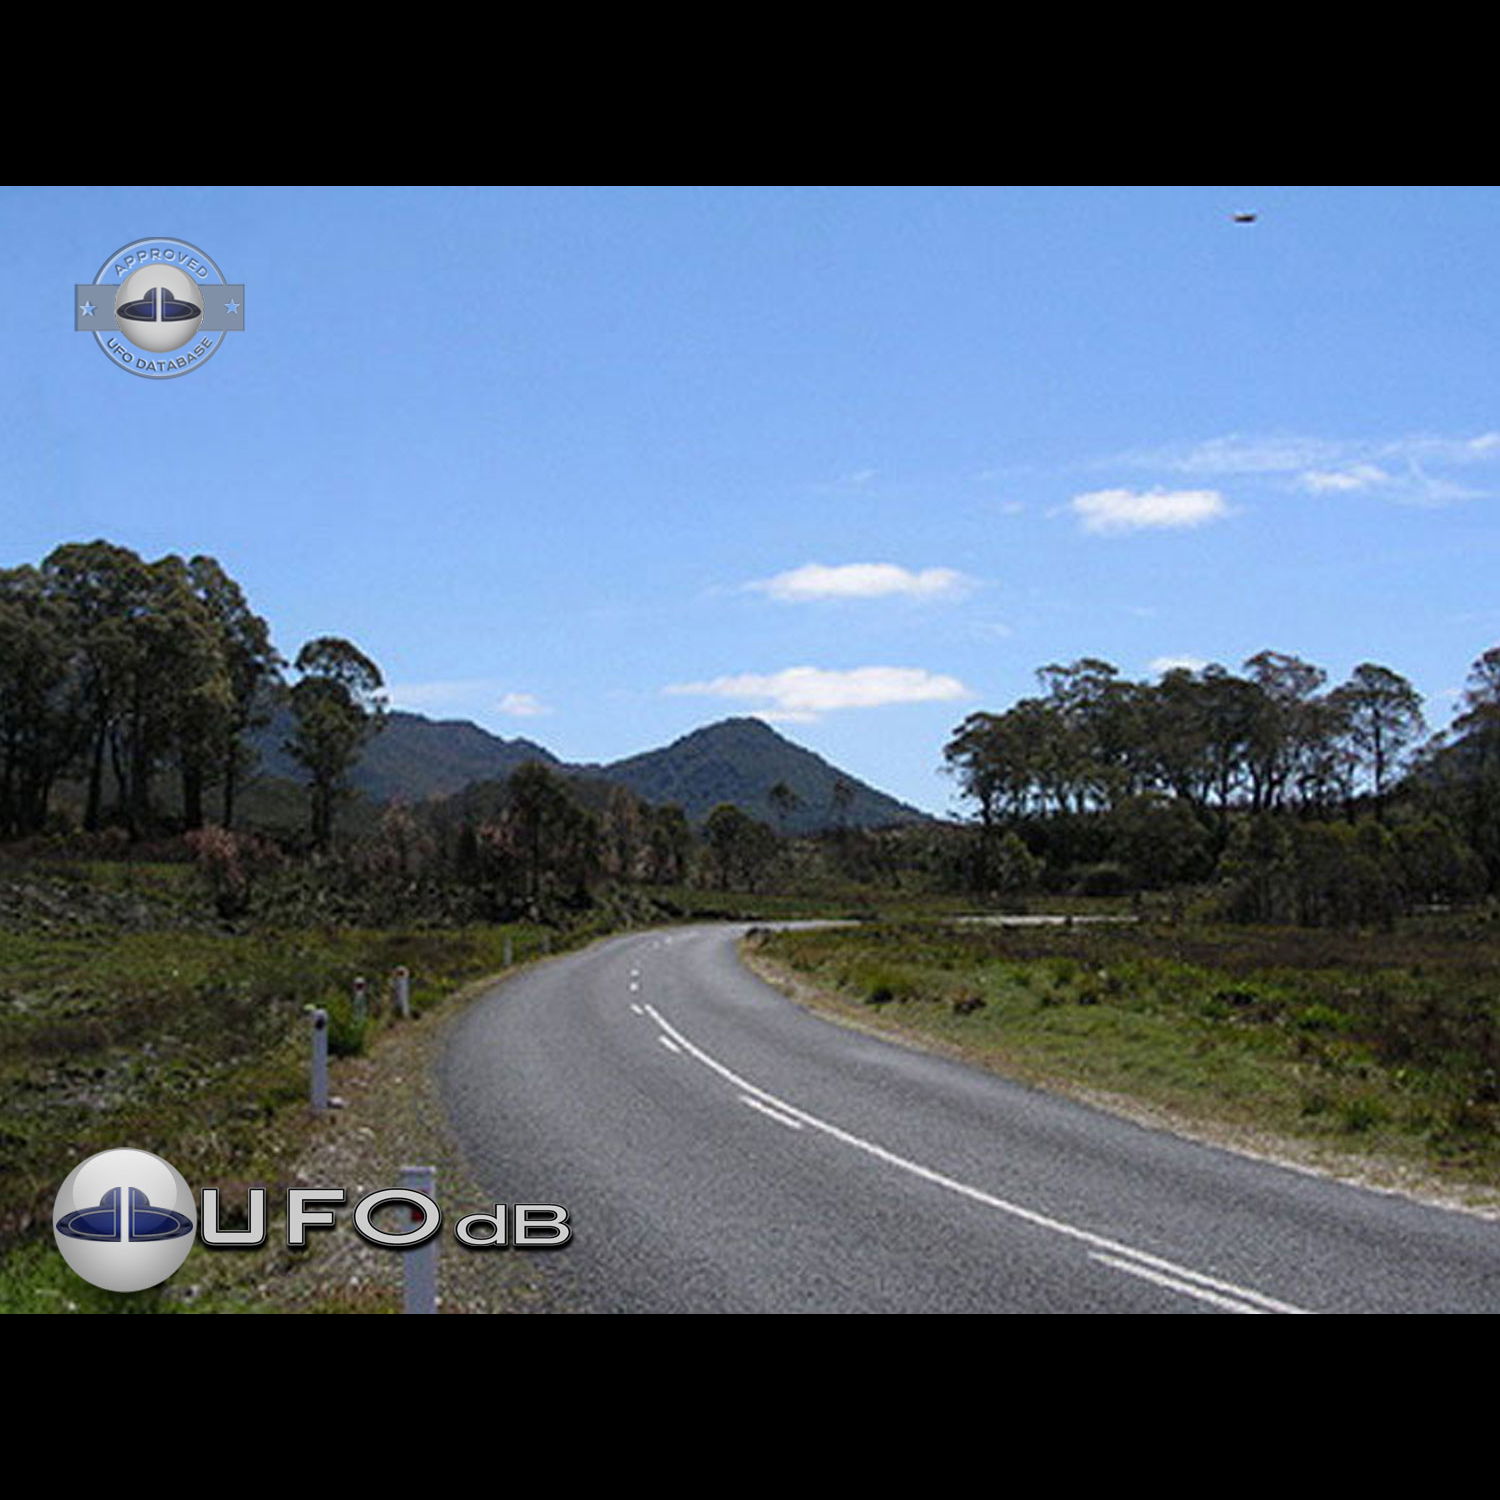 UFO picture taken in Tasmania on A10 highway going from south to north UFO Picture #80-1